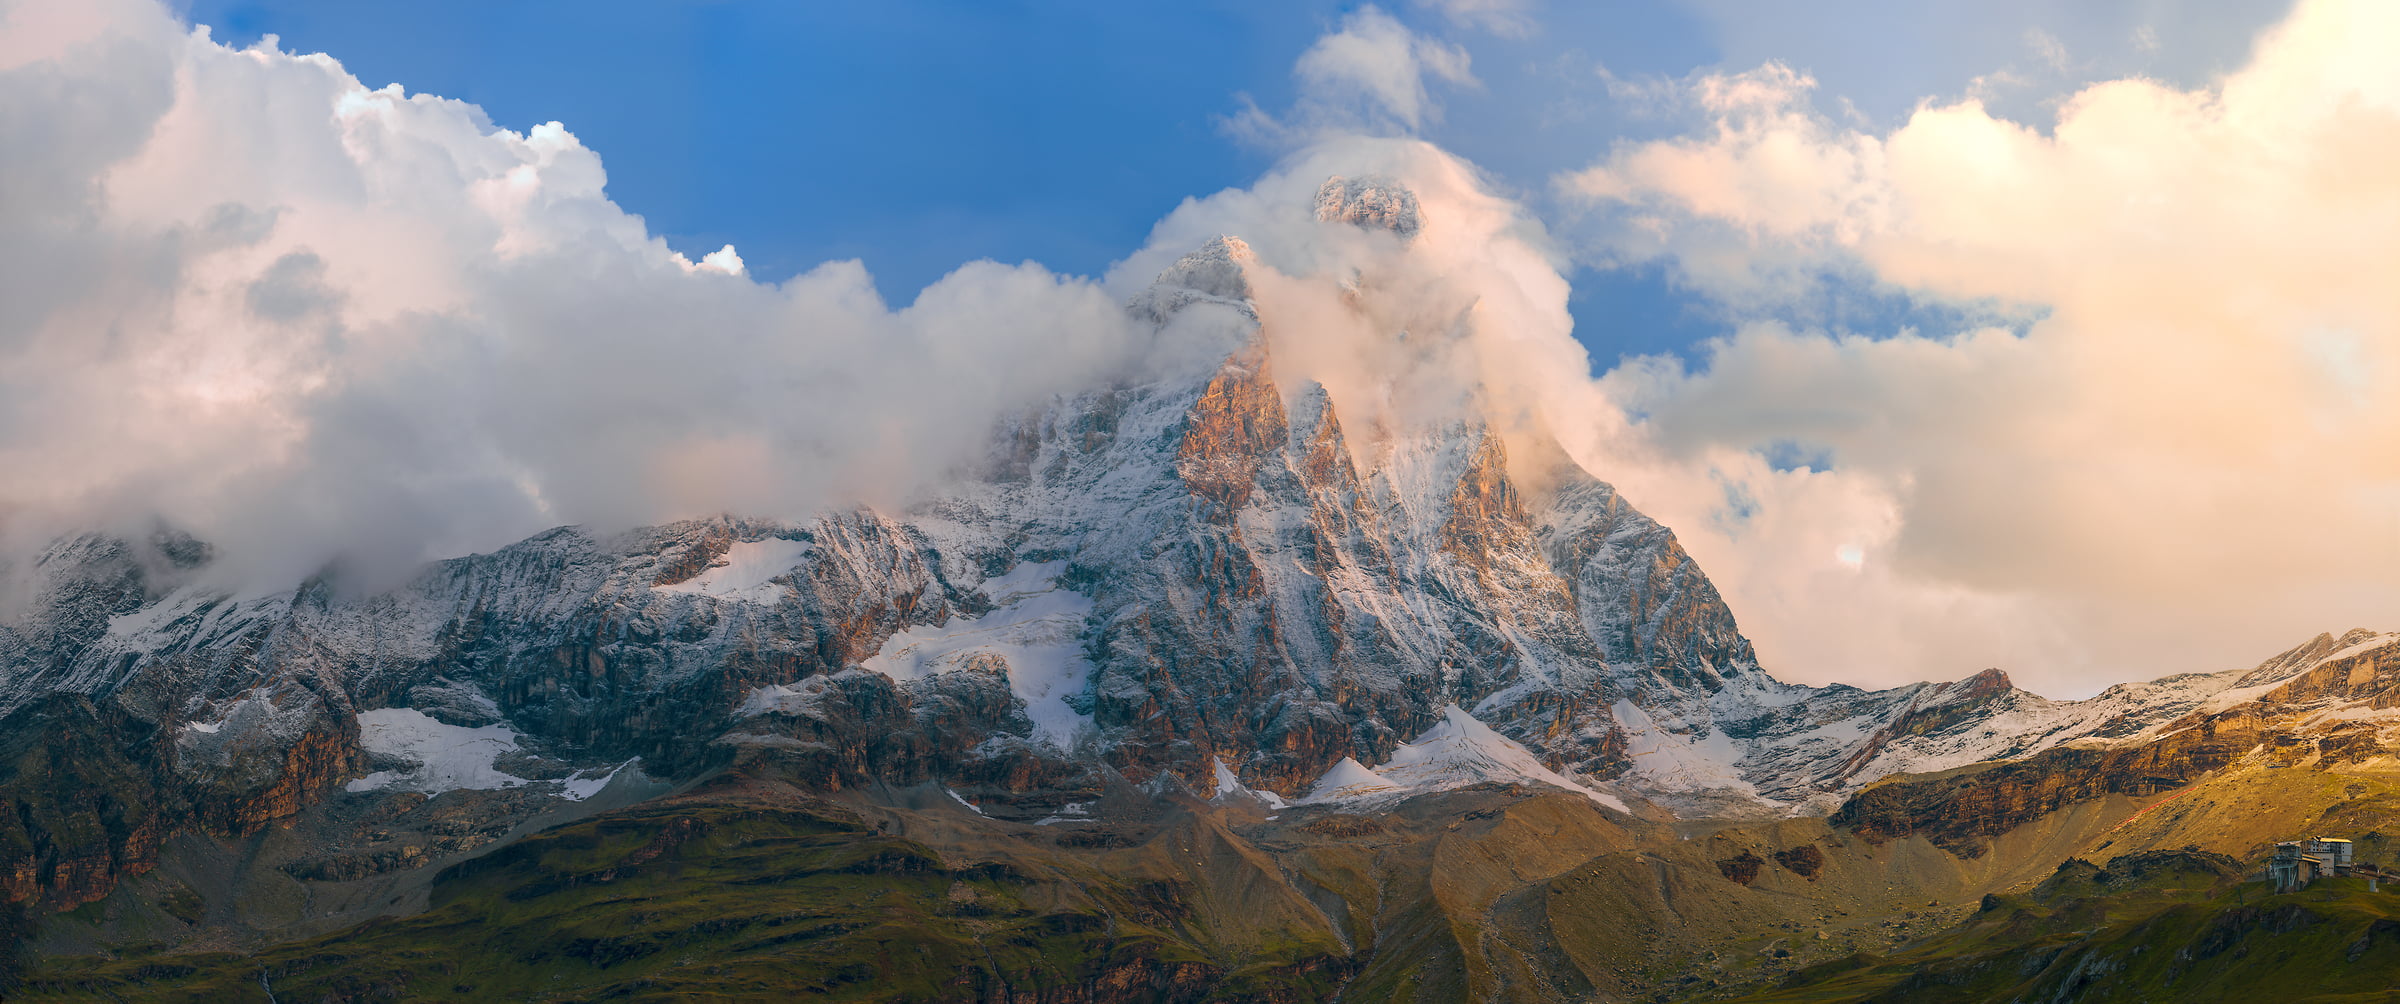 1,371 megapixels! A very high resolution, large-format VAST photo print of the Matterhorn mountain with clouds on the summit at sunset; landscape photograph created by Ennio Pozzetti in Breuil-Cervinia, Valle d'Aosta, Italy